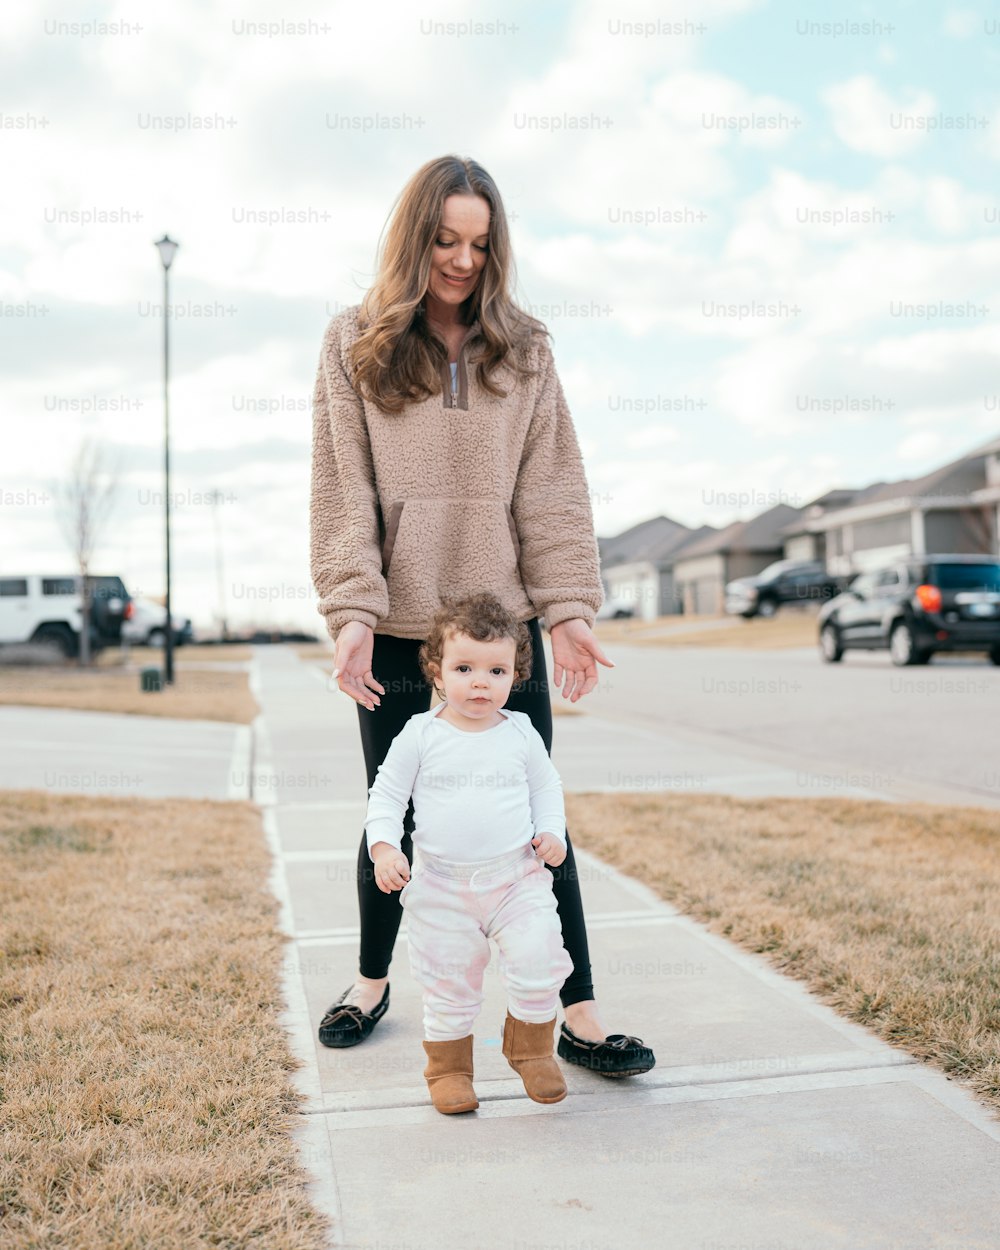 a woman and a baby standing on a sidewalk